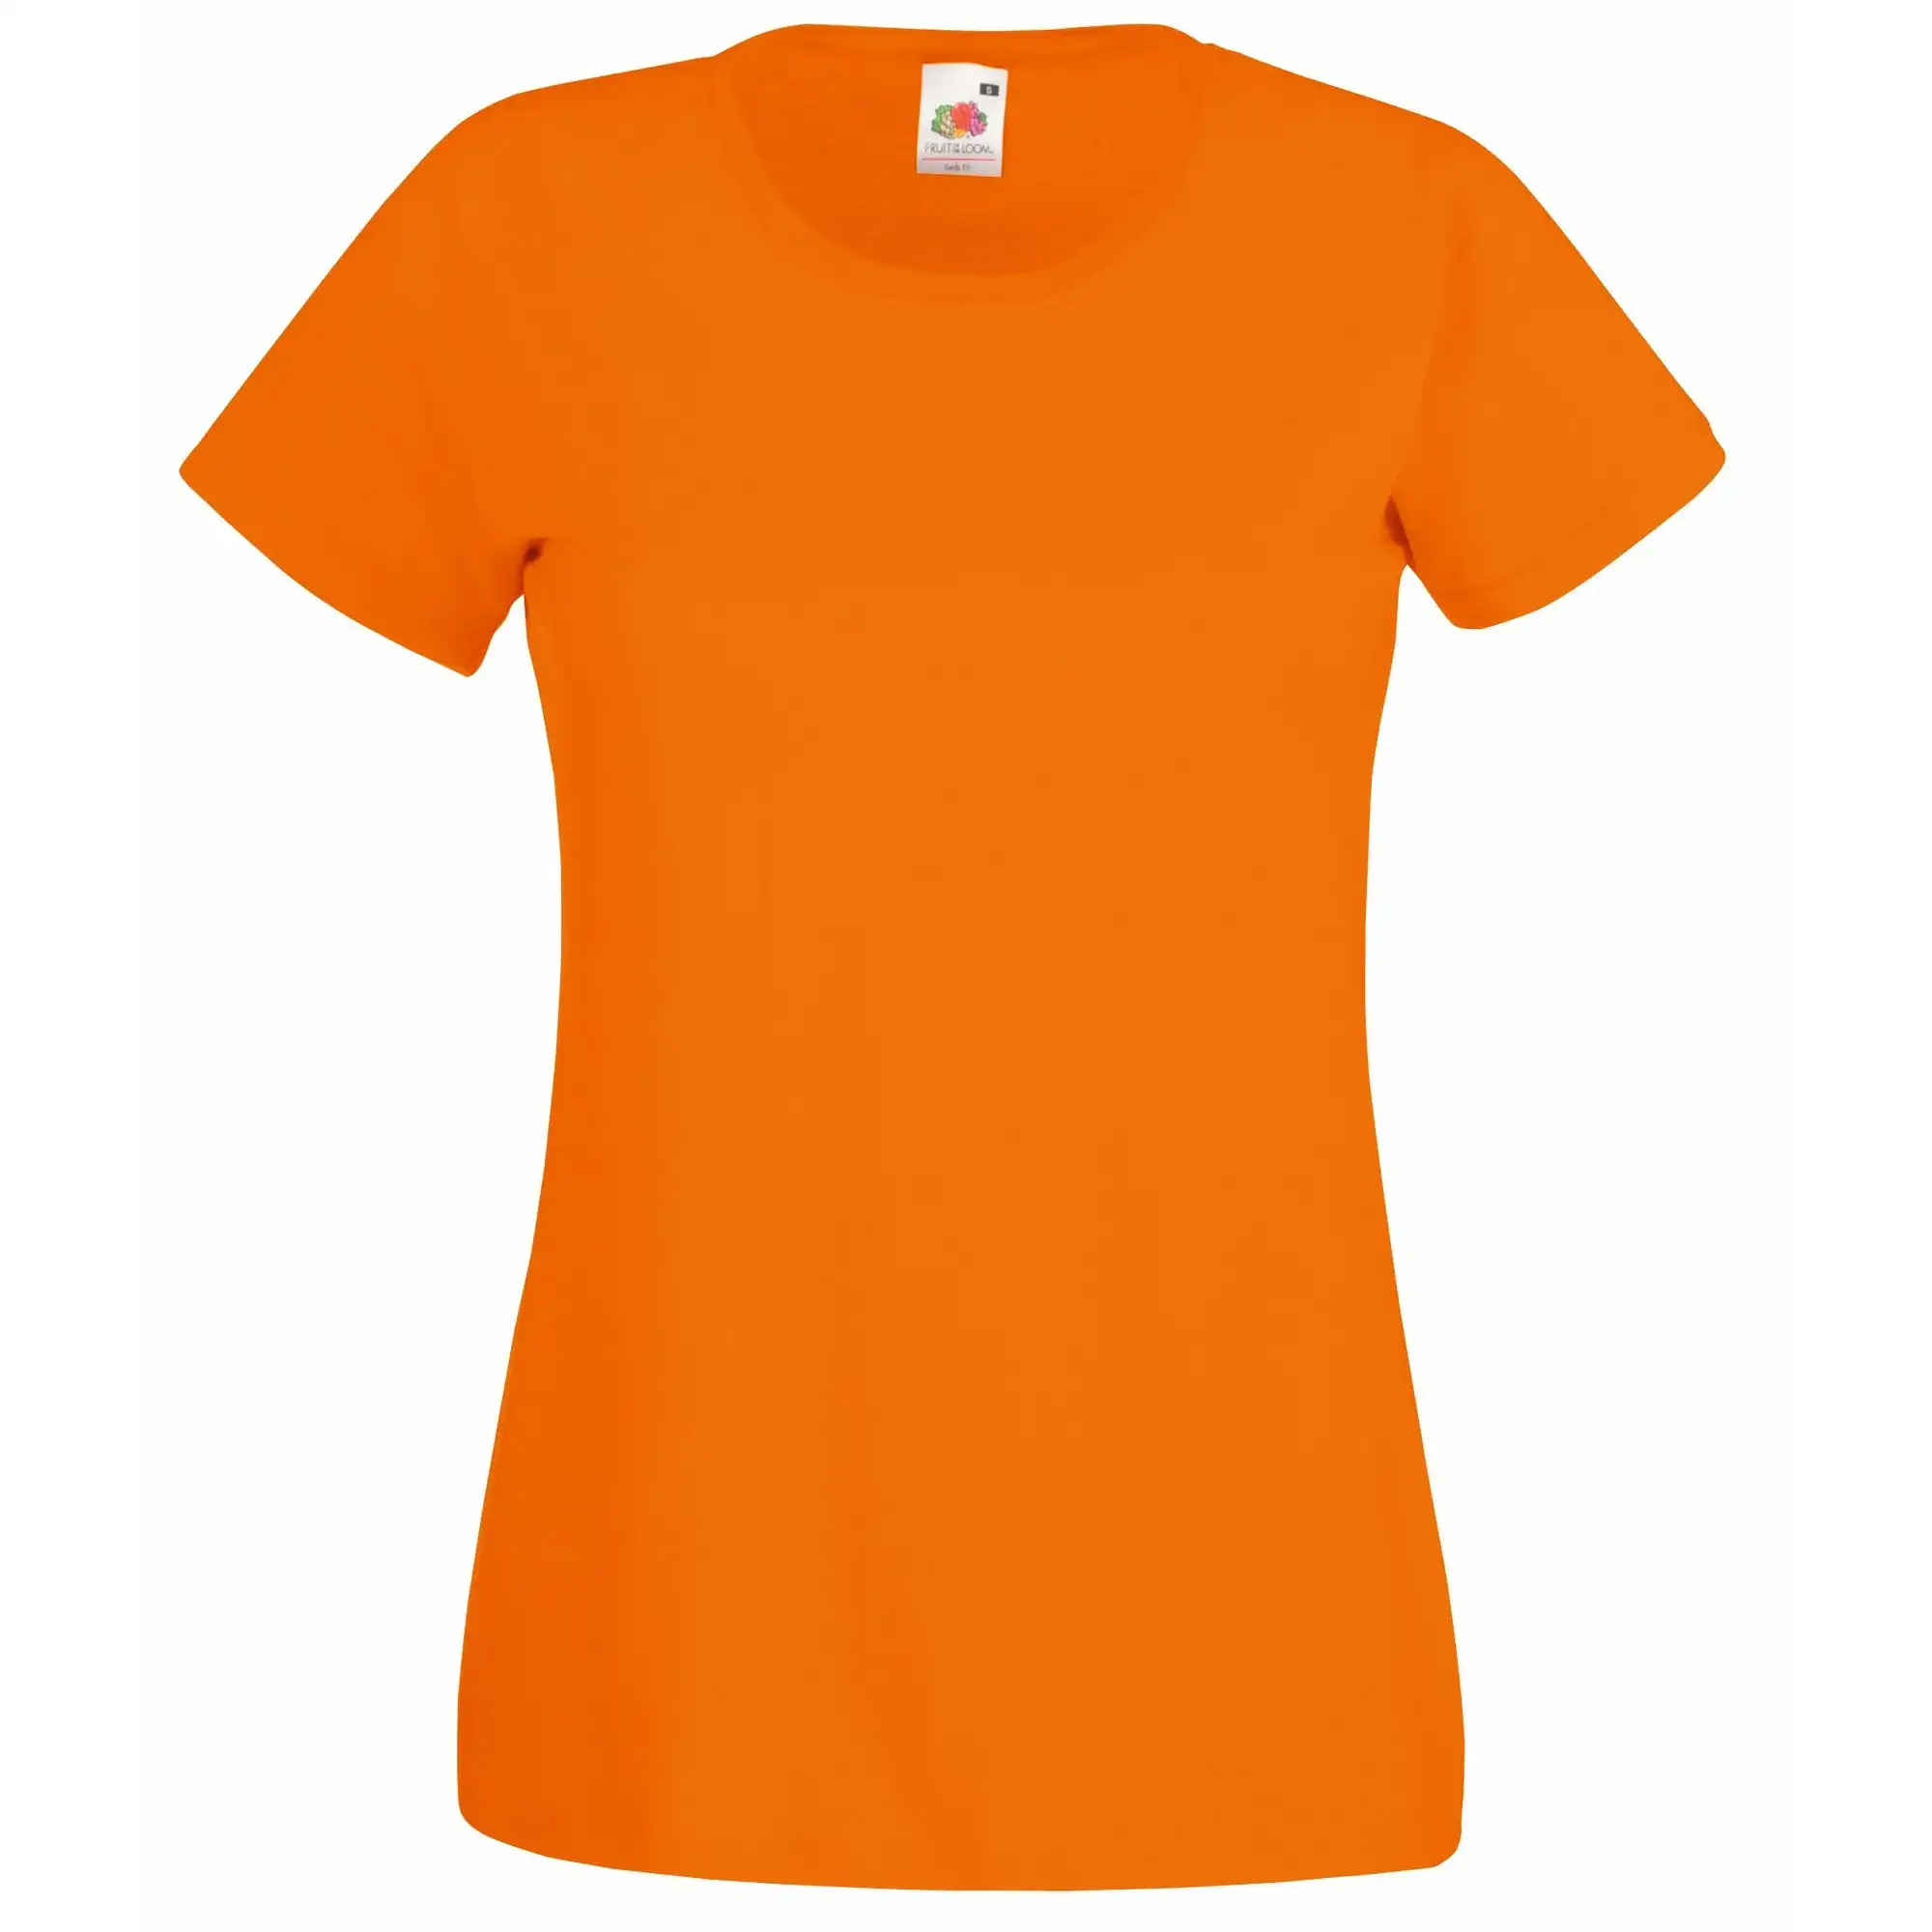 Fruit of the Loom Ladies/Womens Lady-Fit Valueweight Short Sleeve T-Shirt